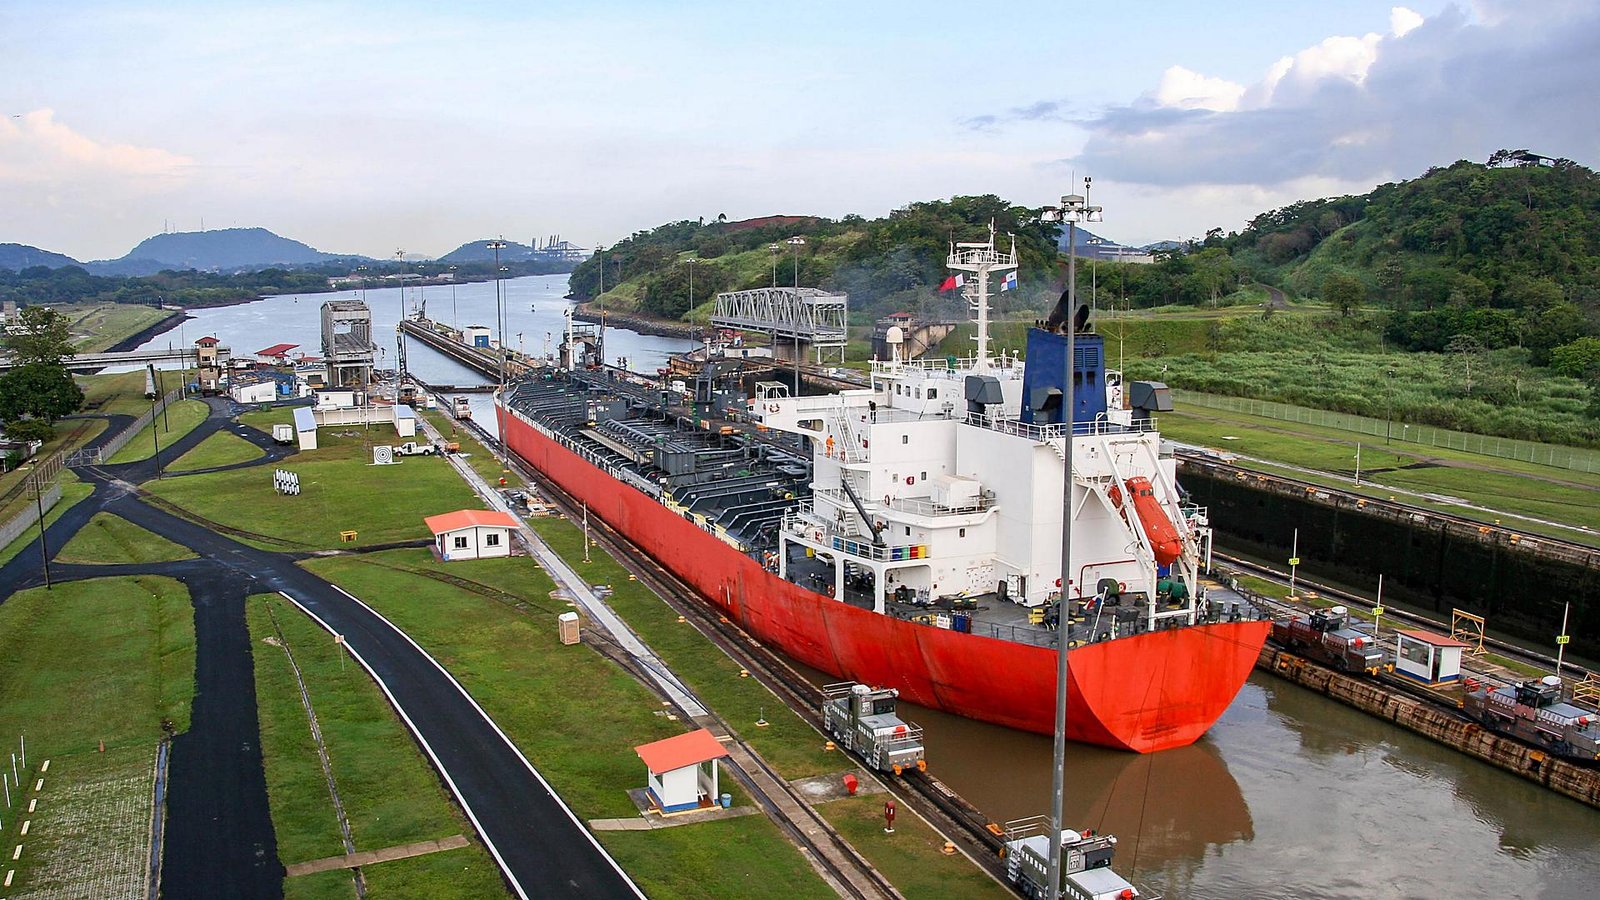 The Panama Canal contributes $1 billion to the economy of Panama each year.